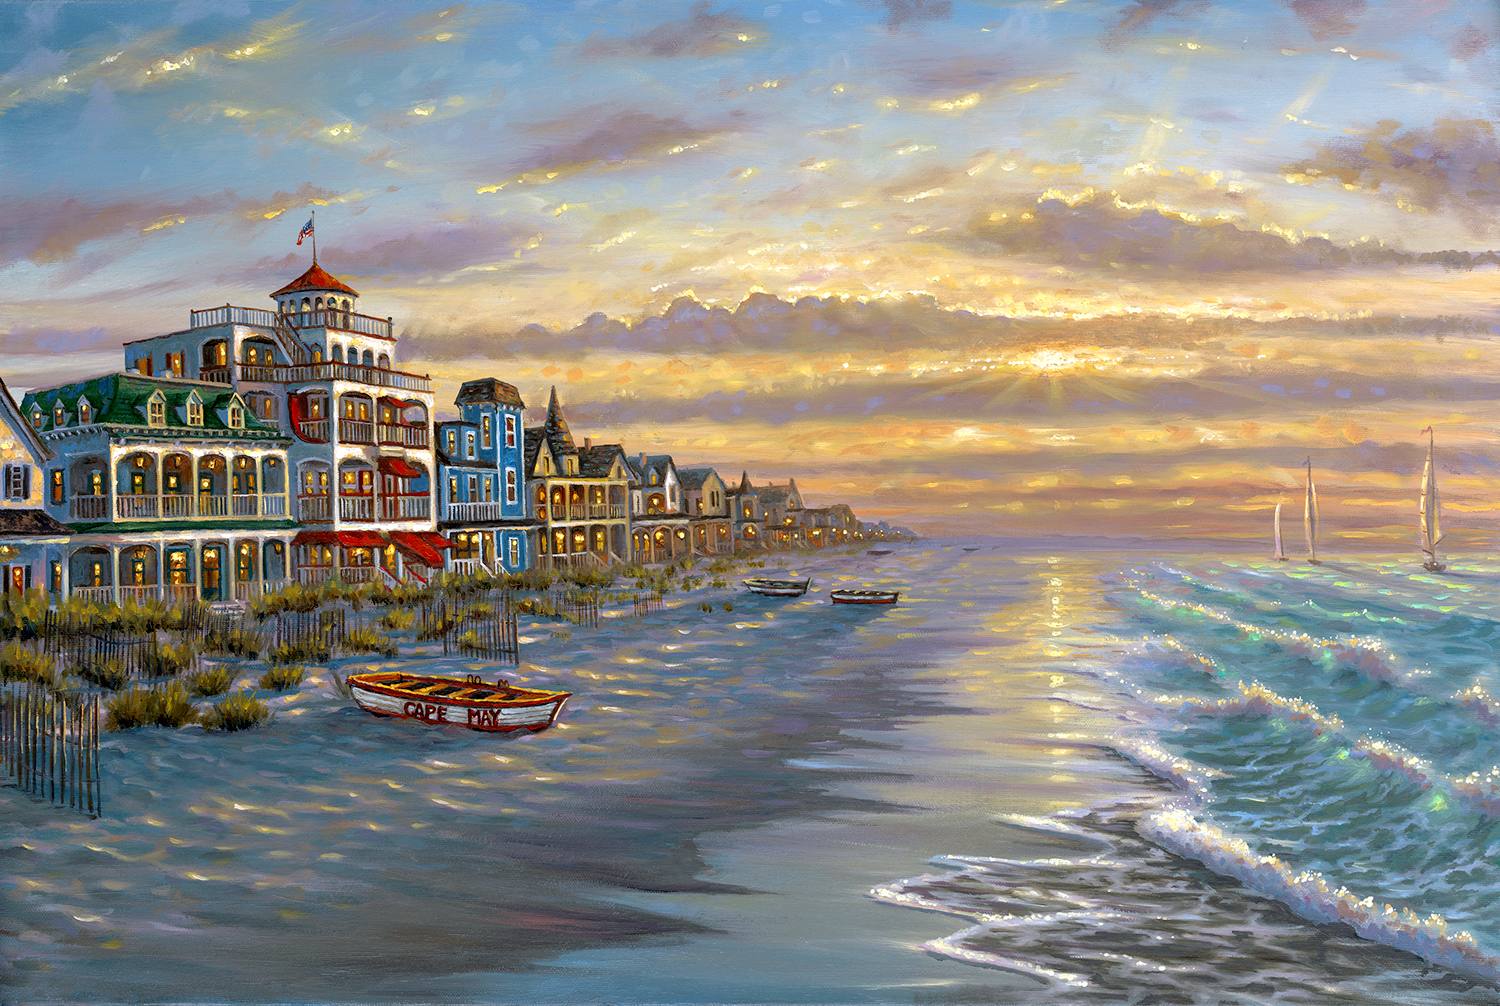 Artistic Painting Art by Robert Finale